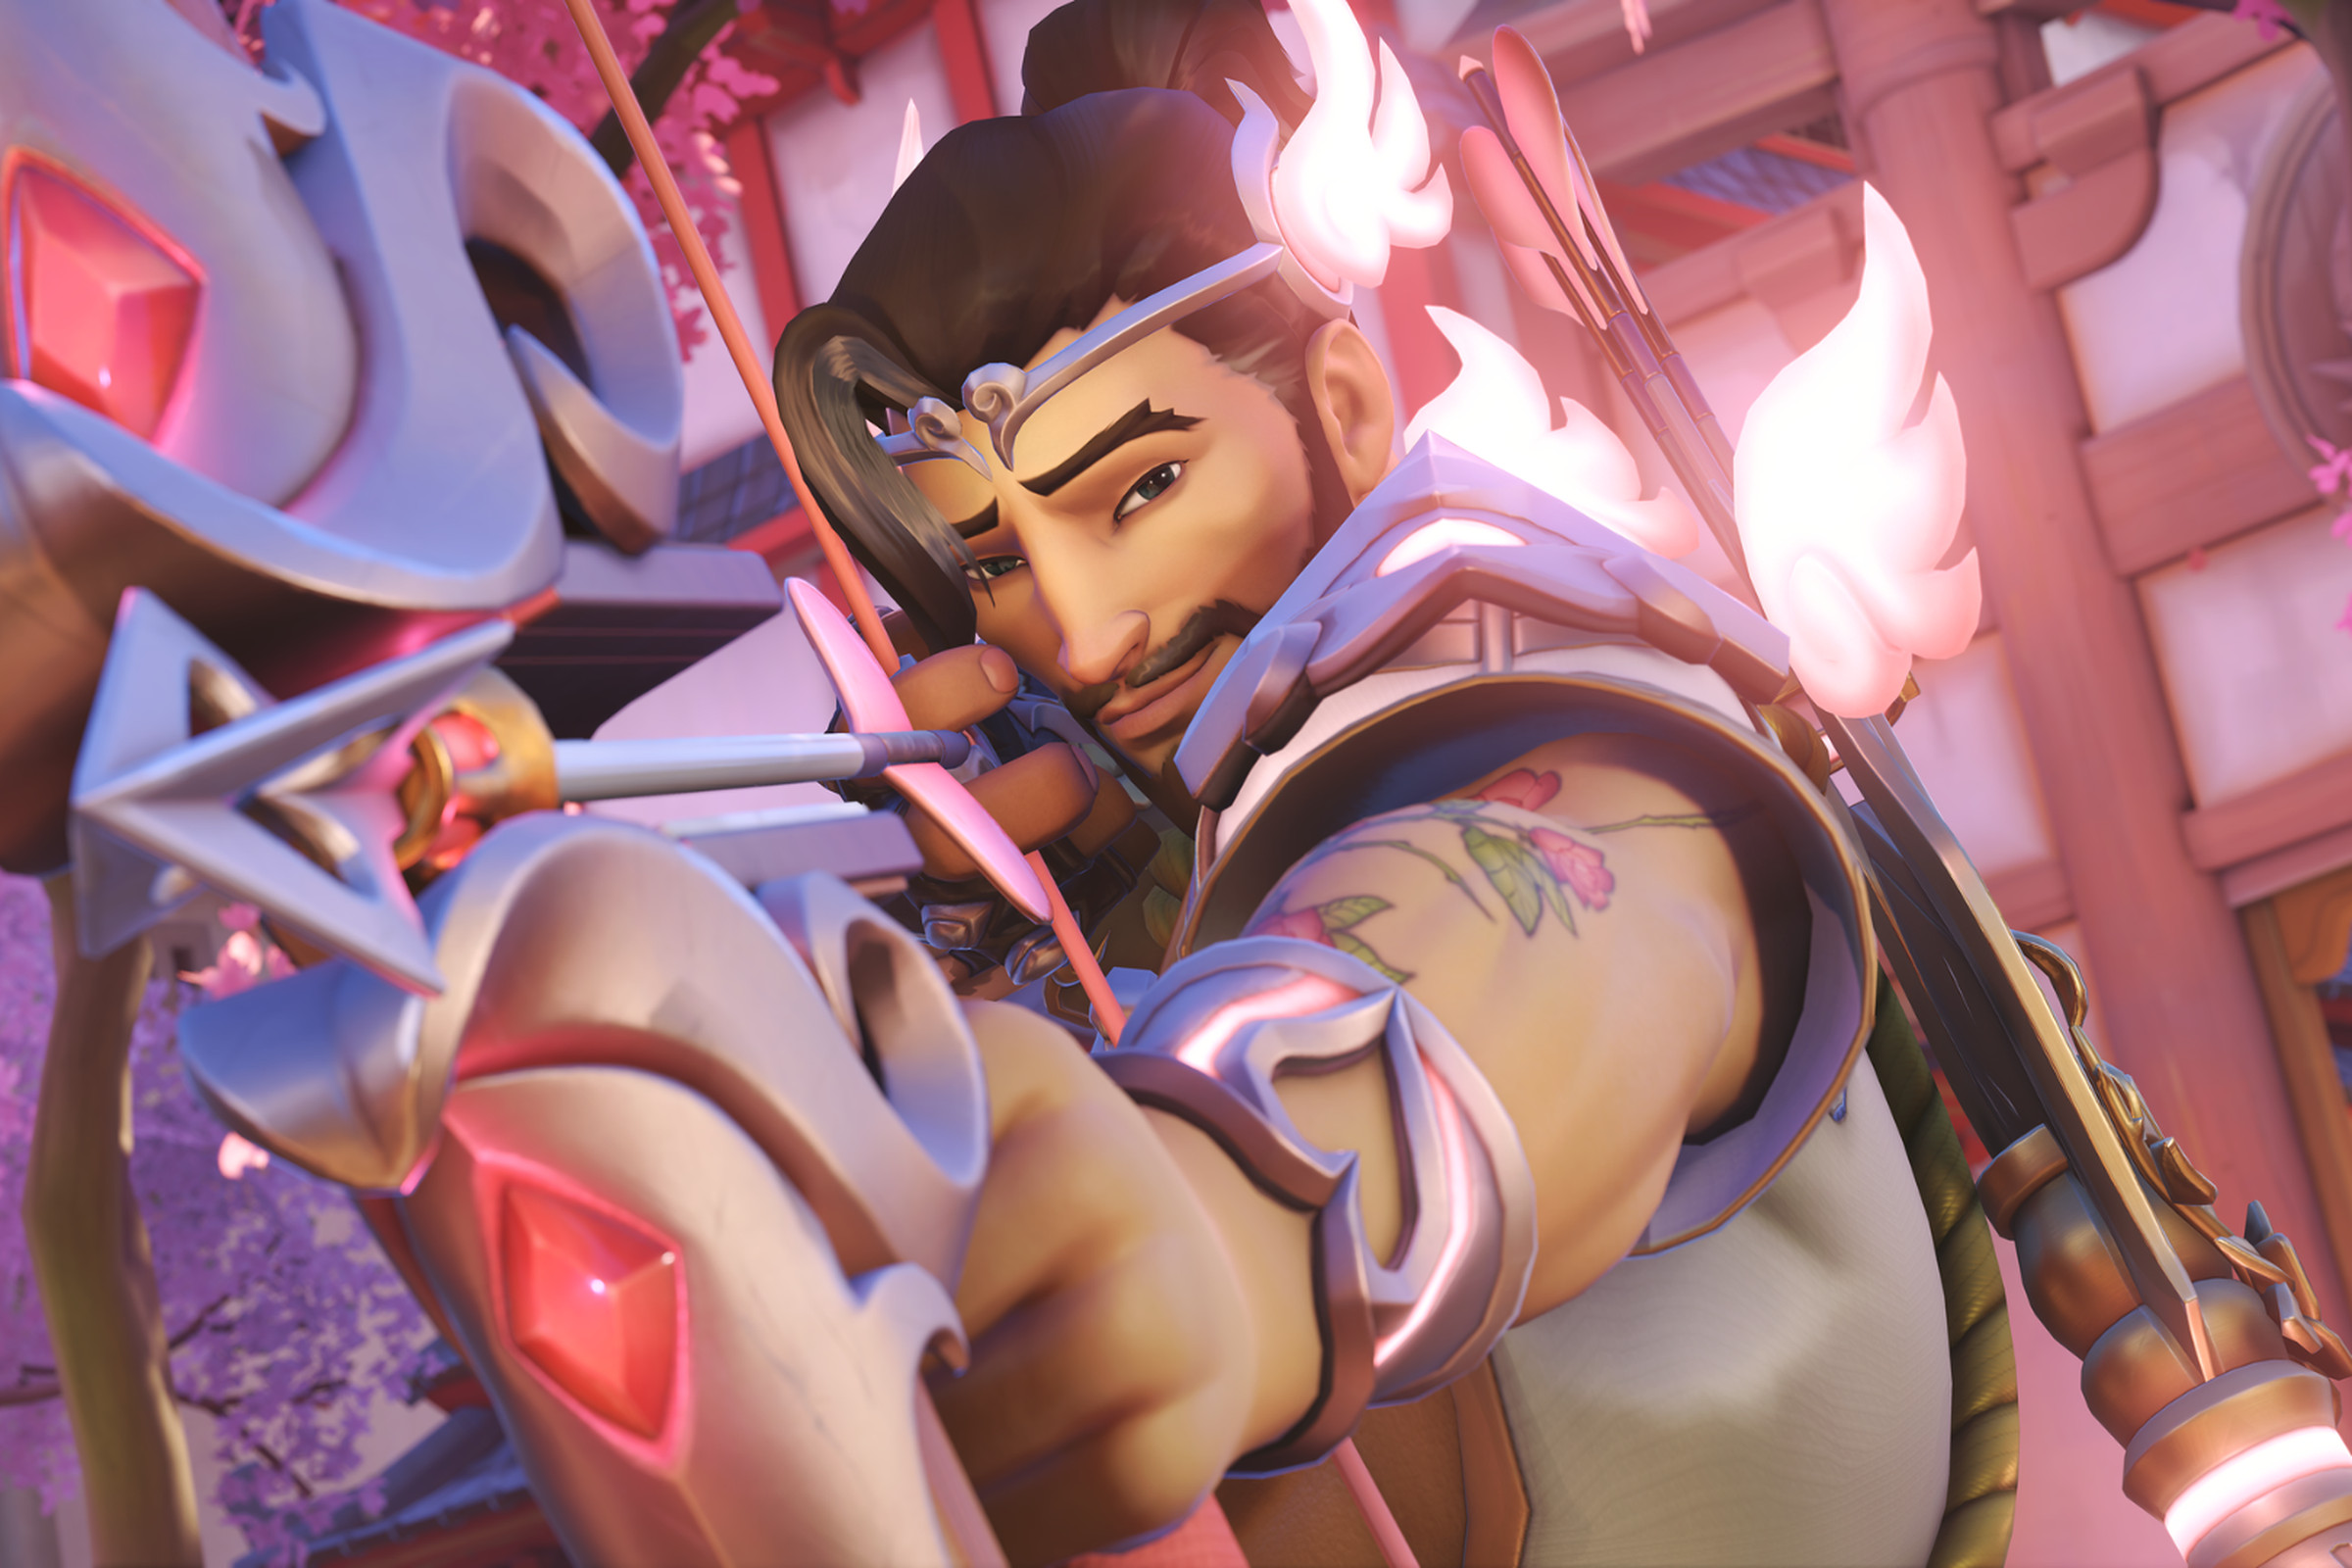 Image of Overwatch hero Hanzo dressed as cupid firing an arrow at the screen.